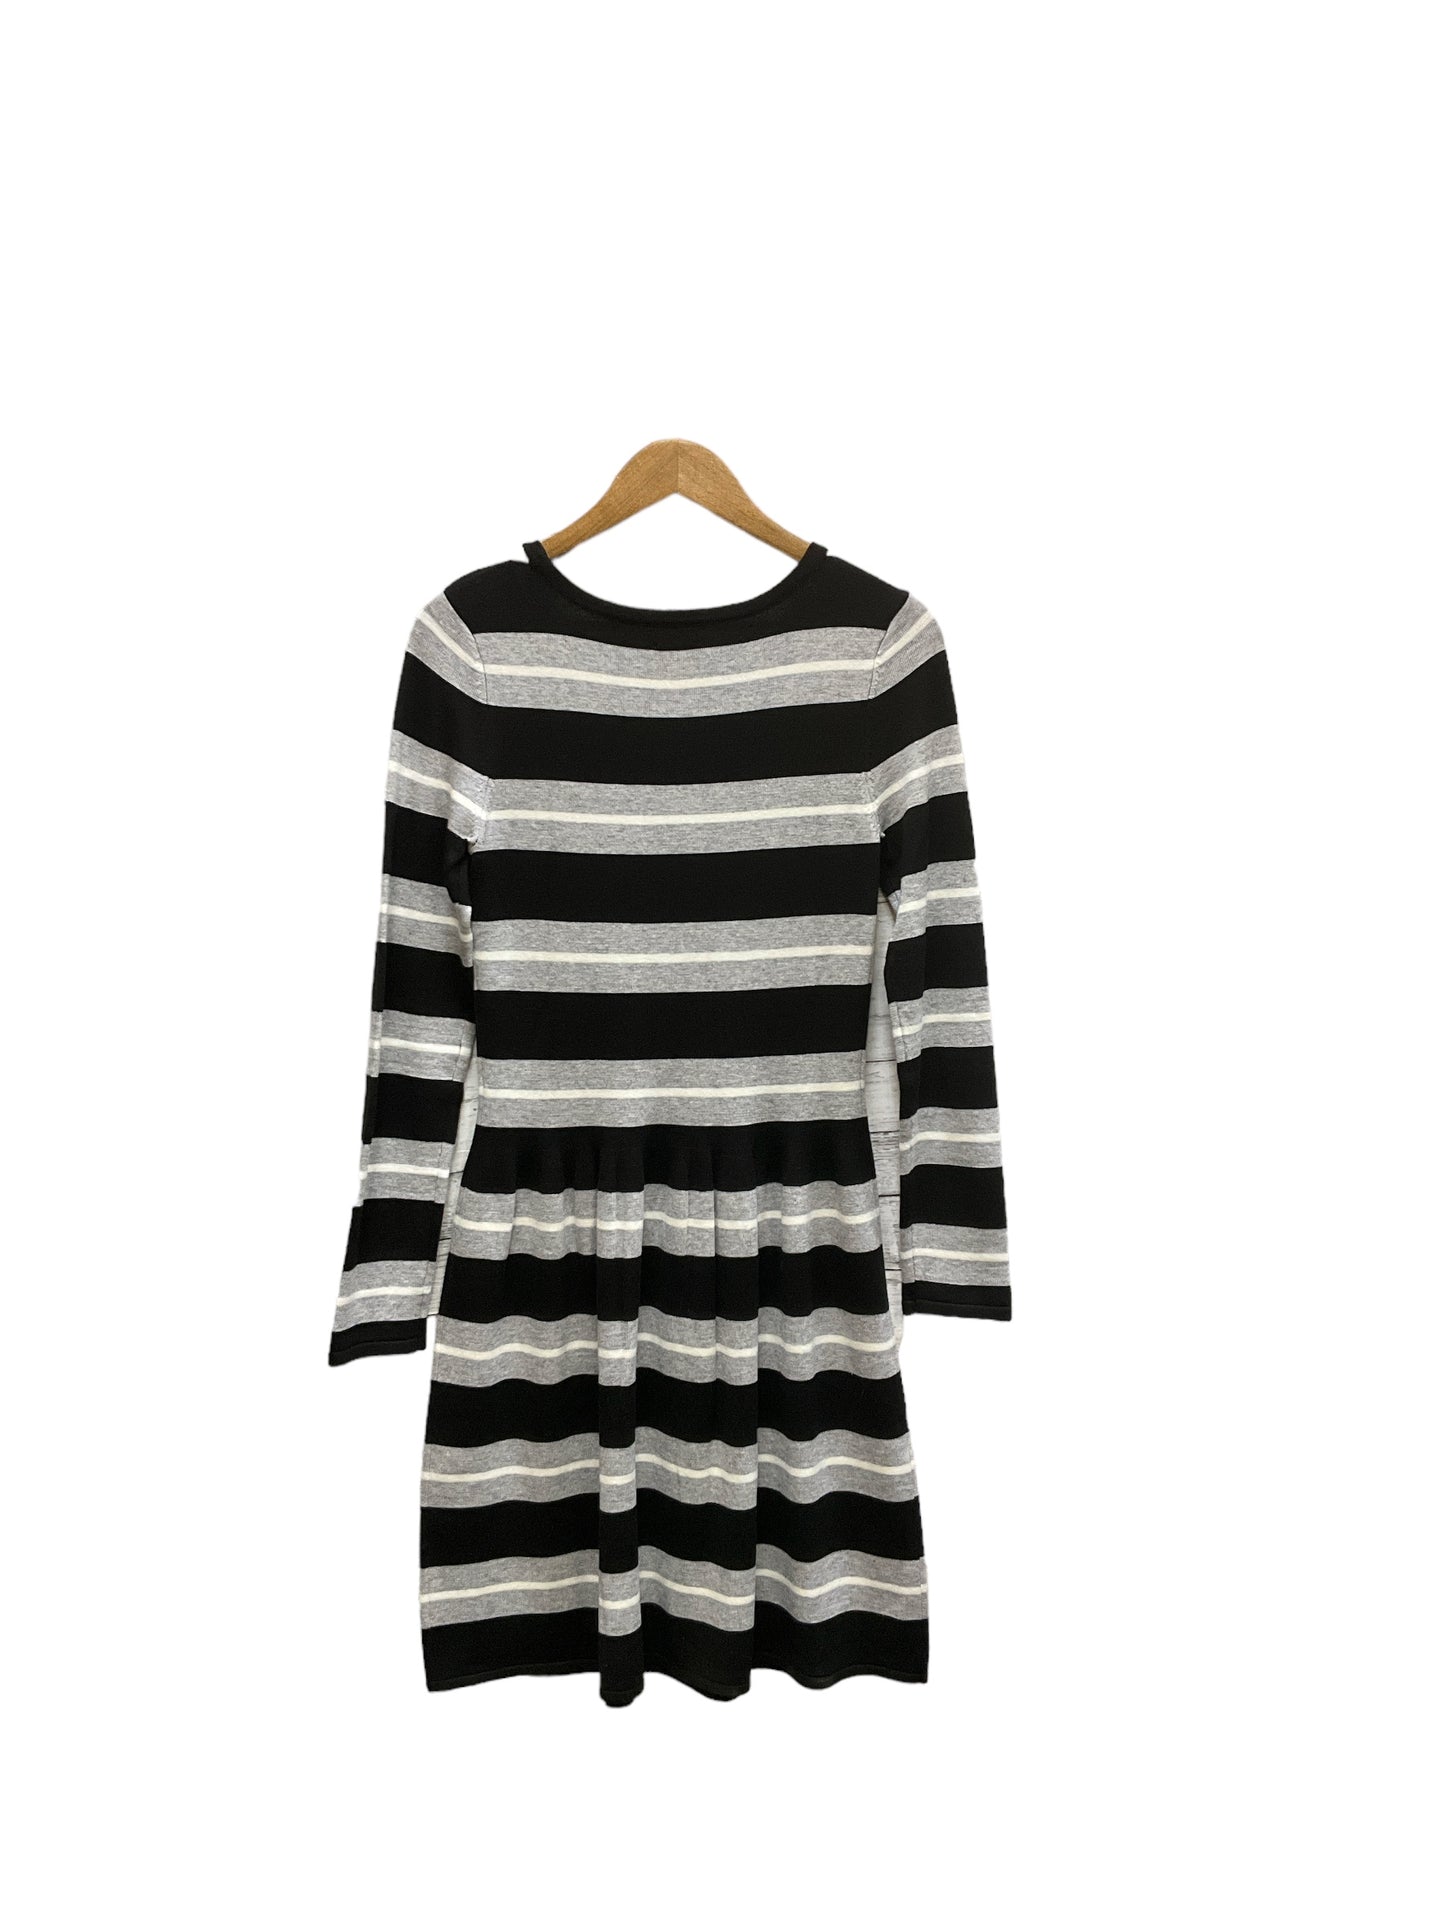 Dress Sweater By Vince Camuto  Size: S